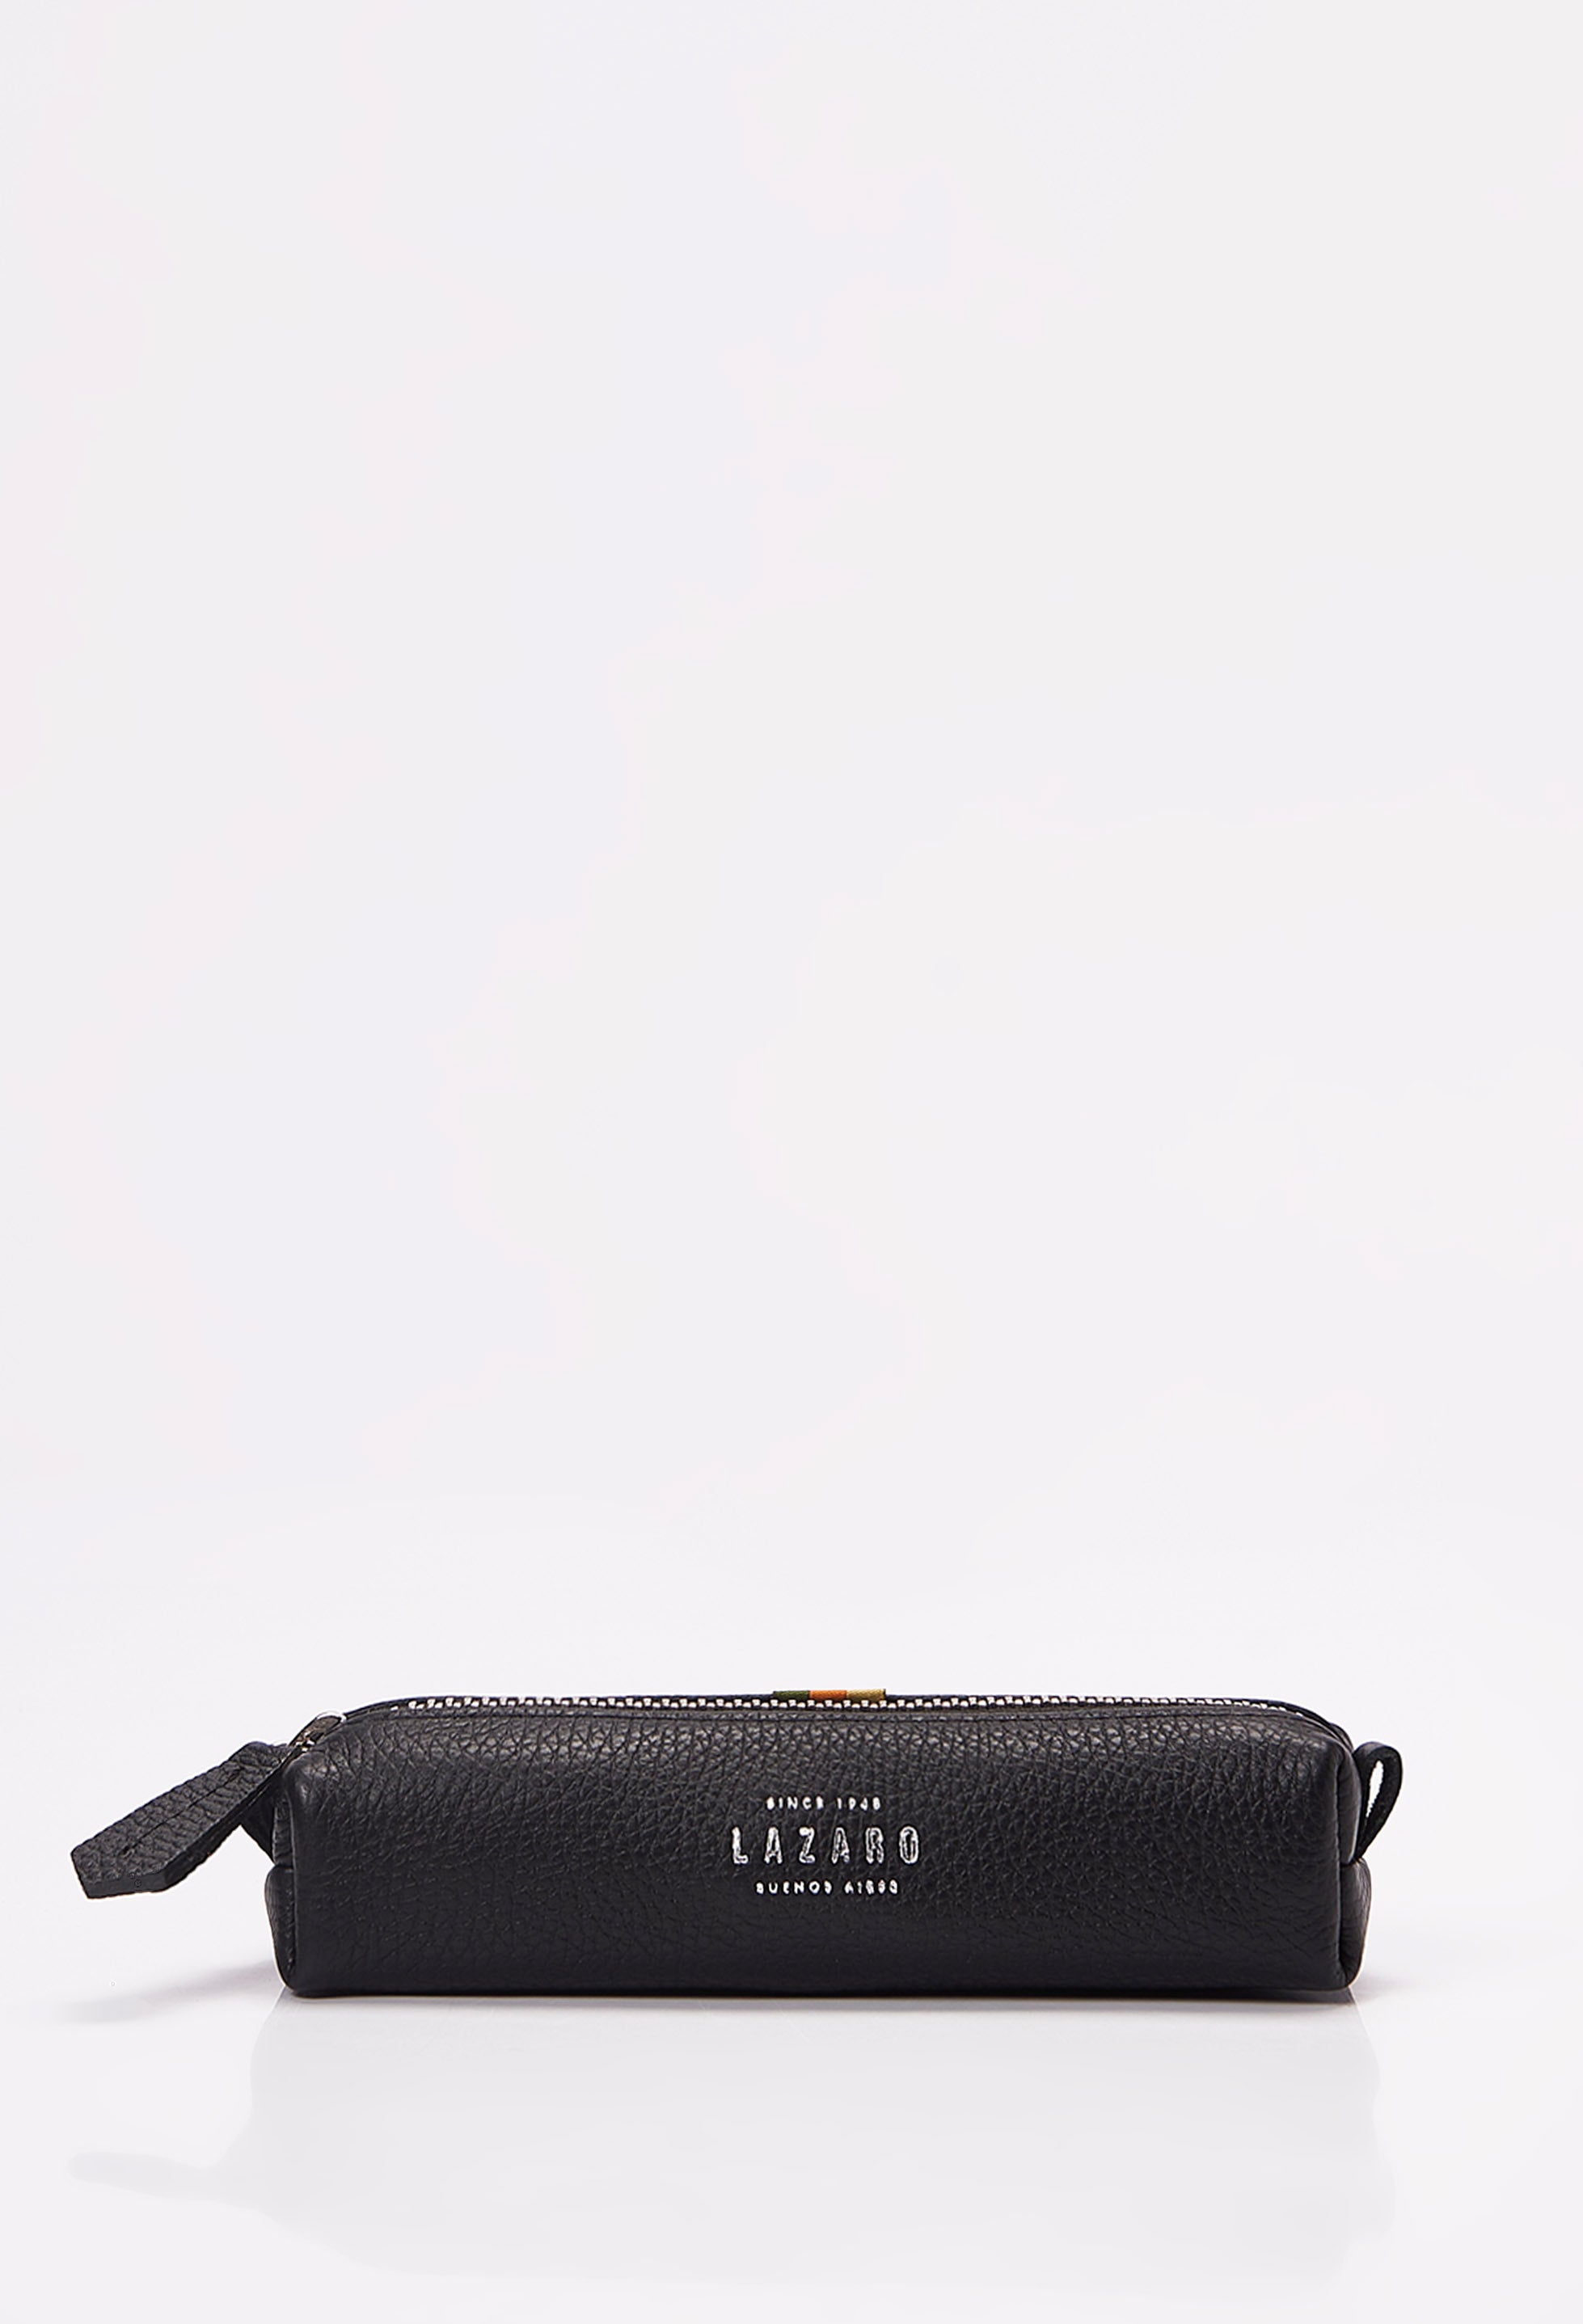 Front of a Black Leather Pencil Case with Lazaro embossed logo.